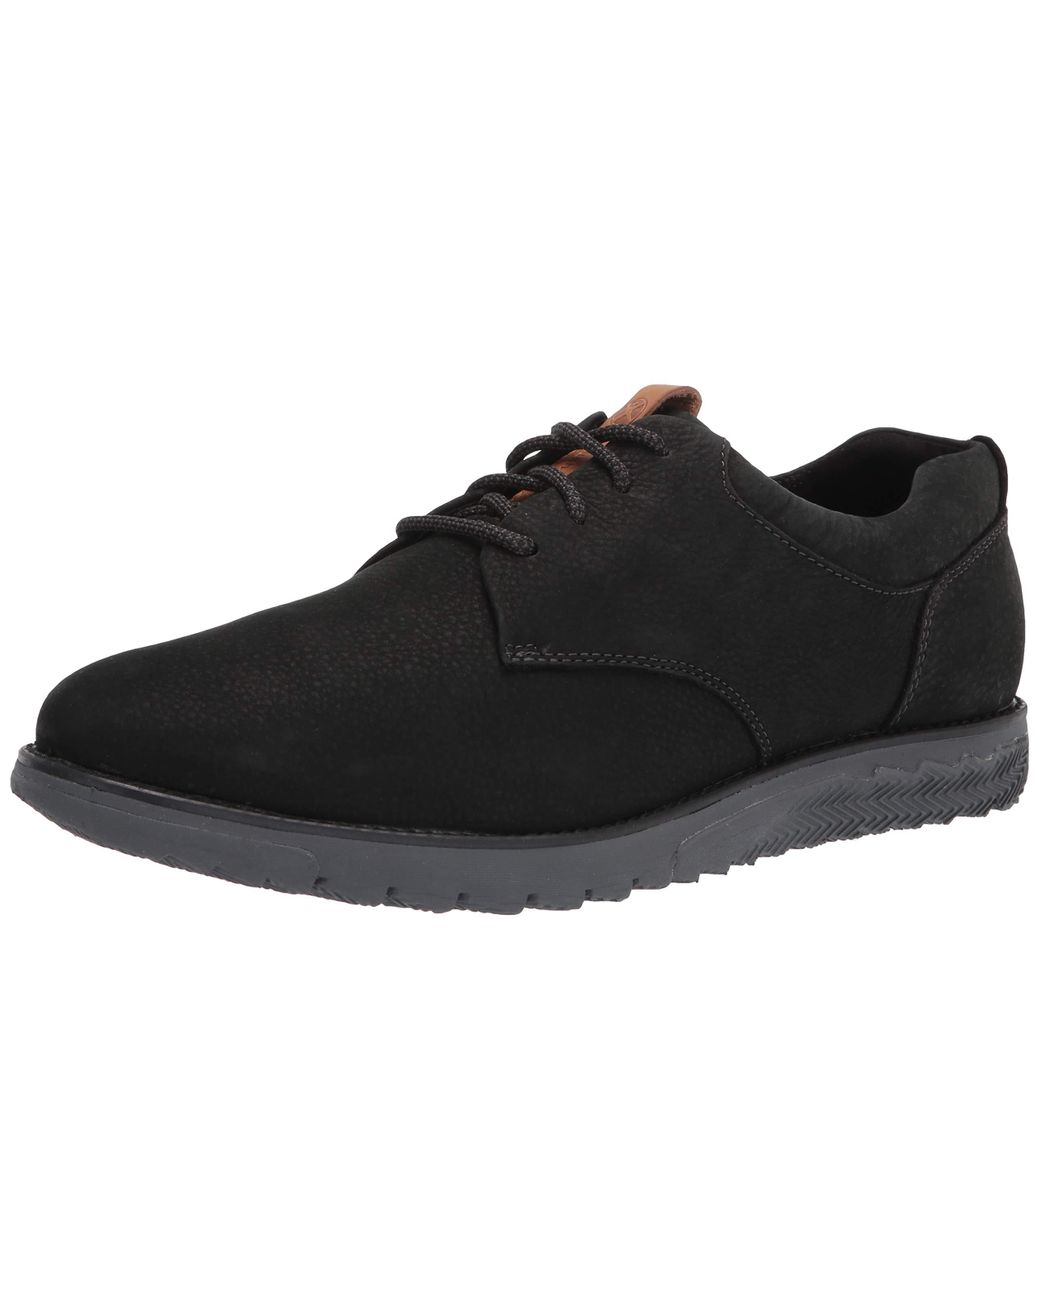 Hush Puppies Leather Expert Plain Toe Laceup Oxford in Black Nubuck ...